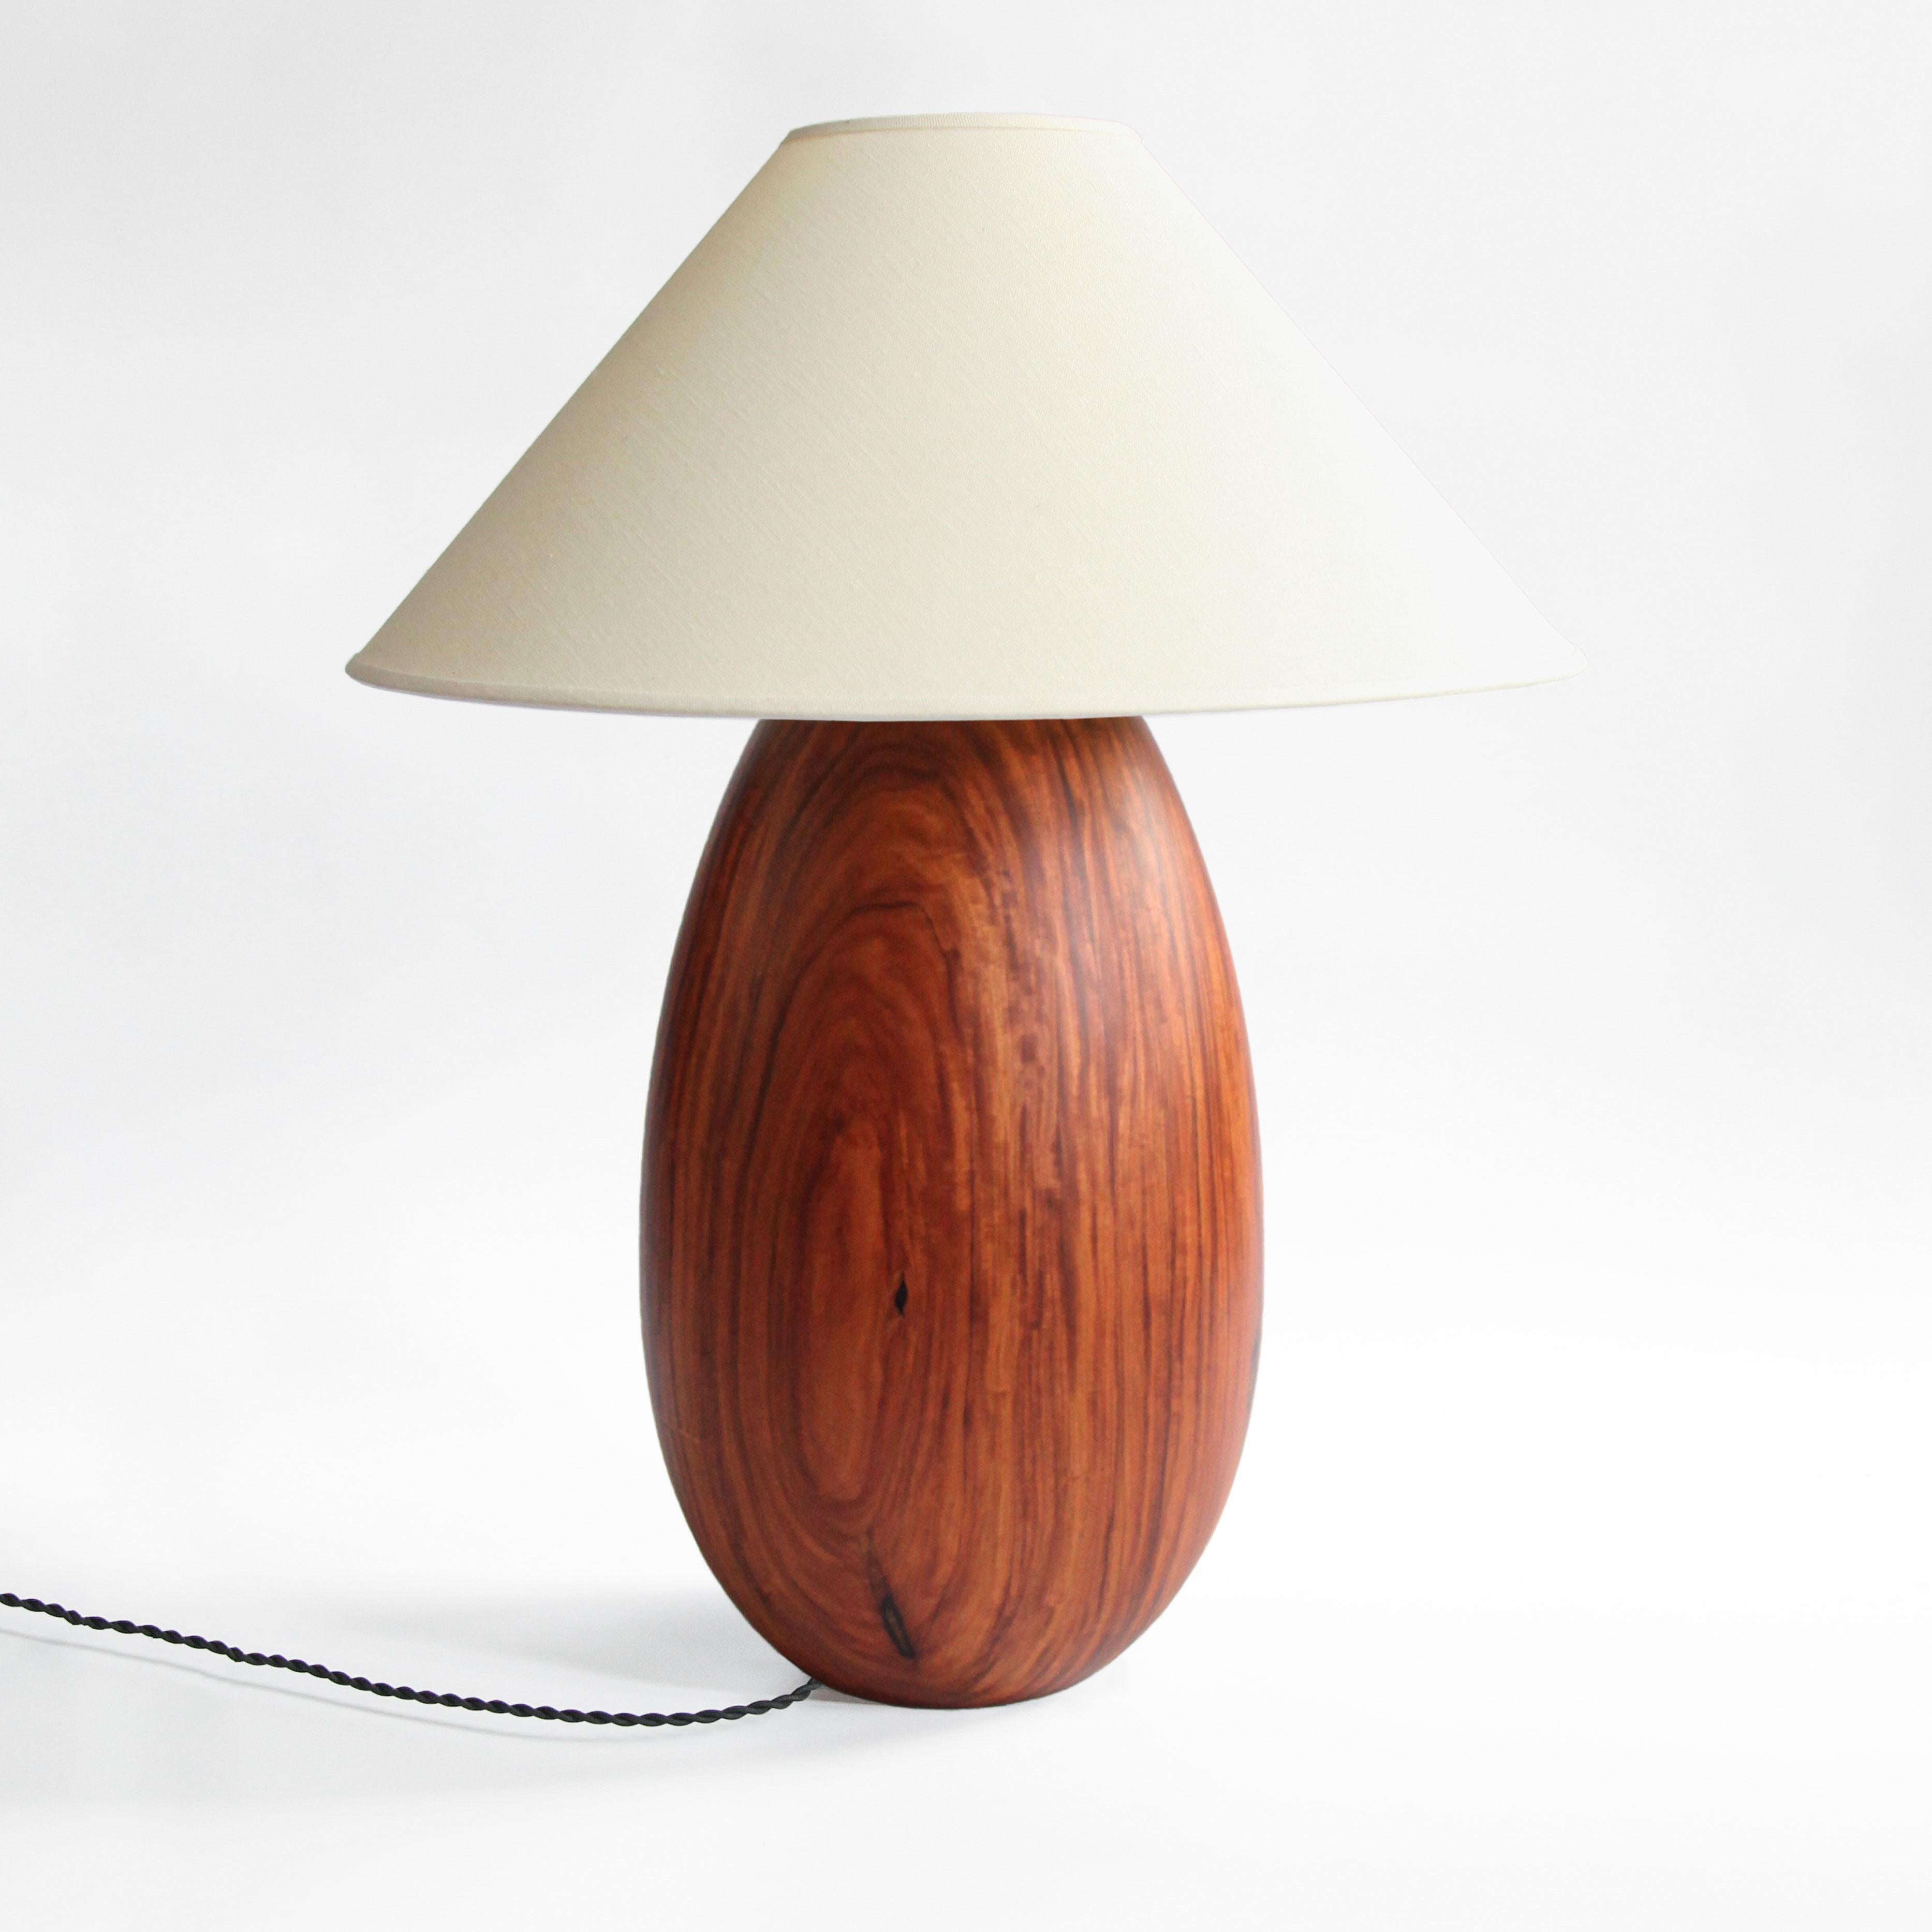 The Árbol collection is an embrace of tropical modernism; each lamp is composed of salvaged tropical hardwoods from the Bolivian city of Santa Cruz, where trees that are felled by natural causes, or for construction, are rescued by our team. A blend